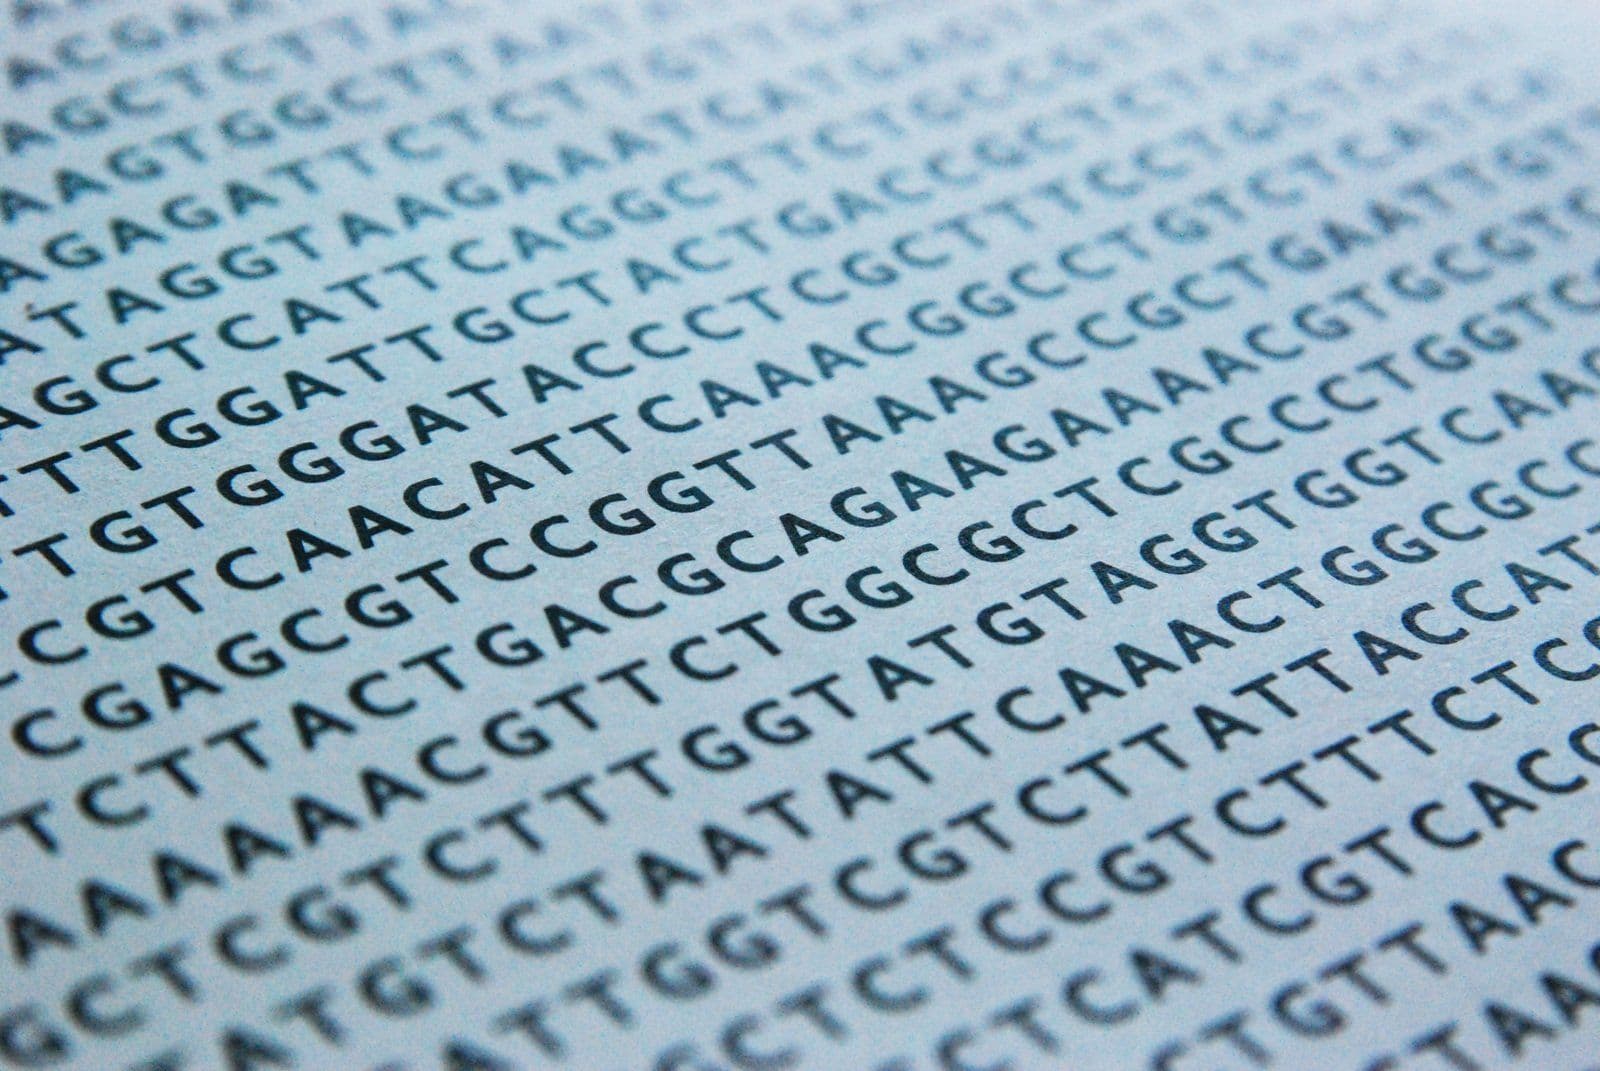 Privacy and confidentiality of genetic information: from genetic privacy to open consent